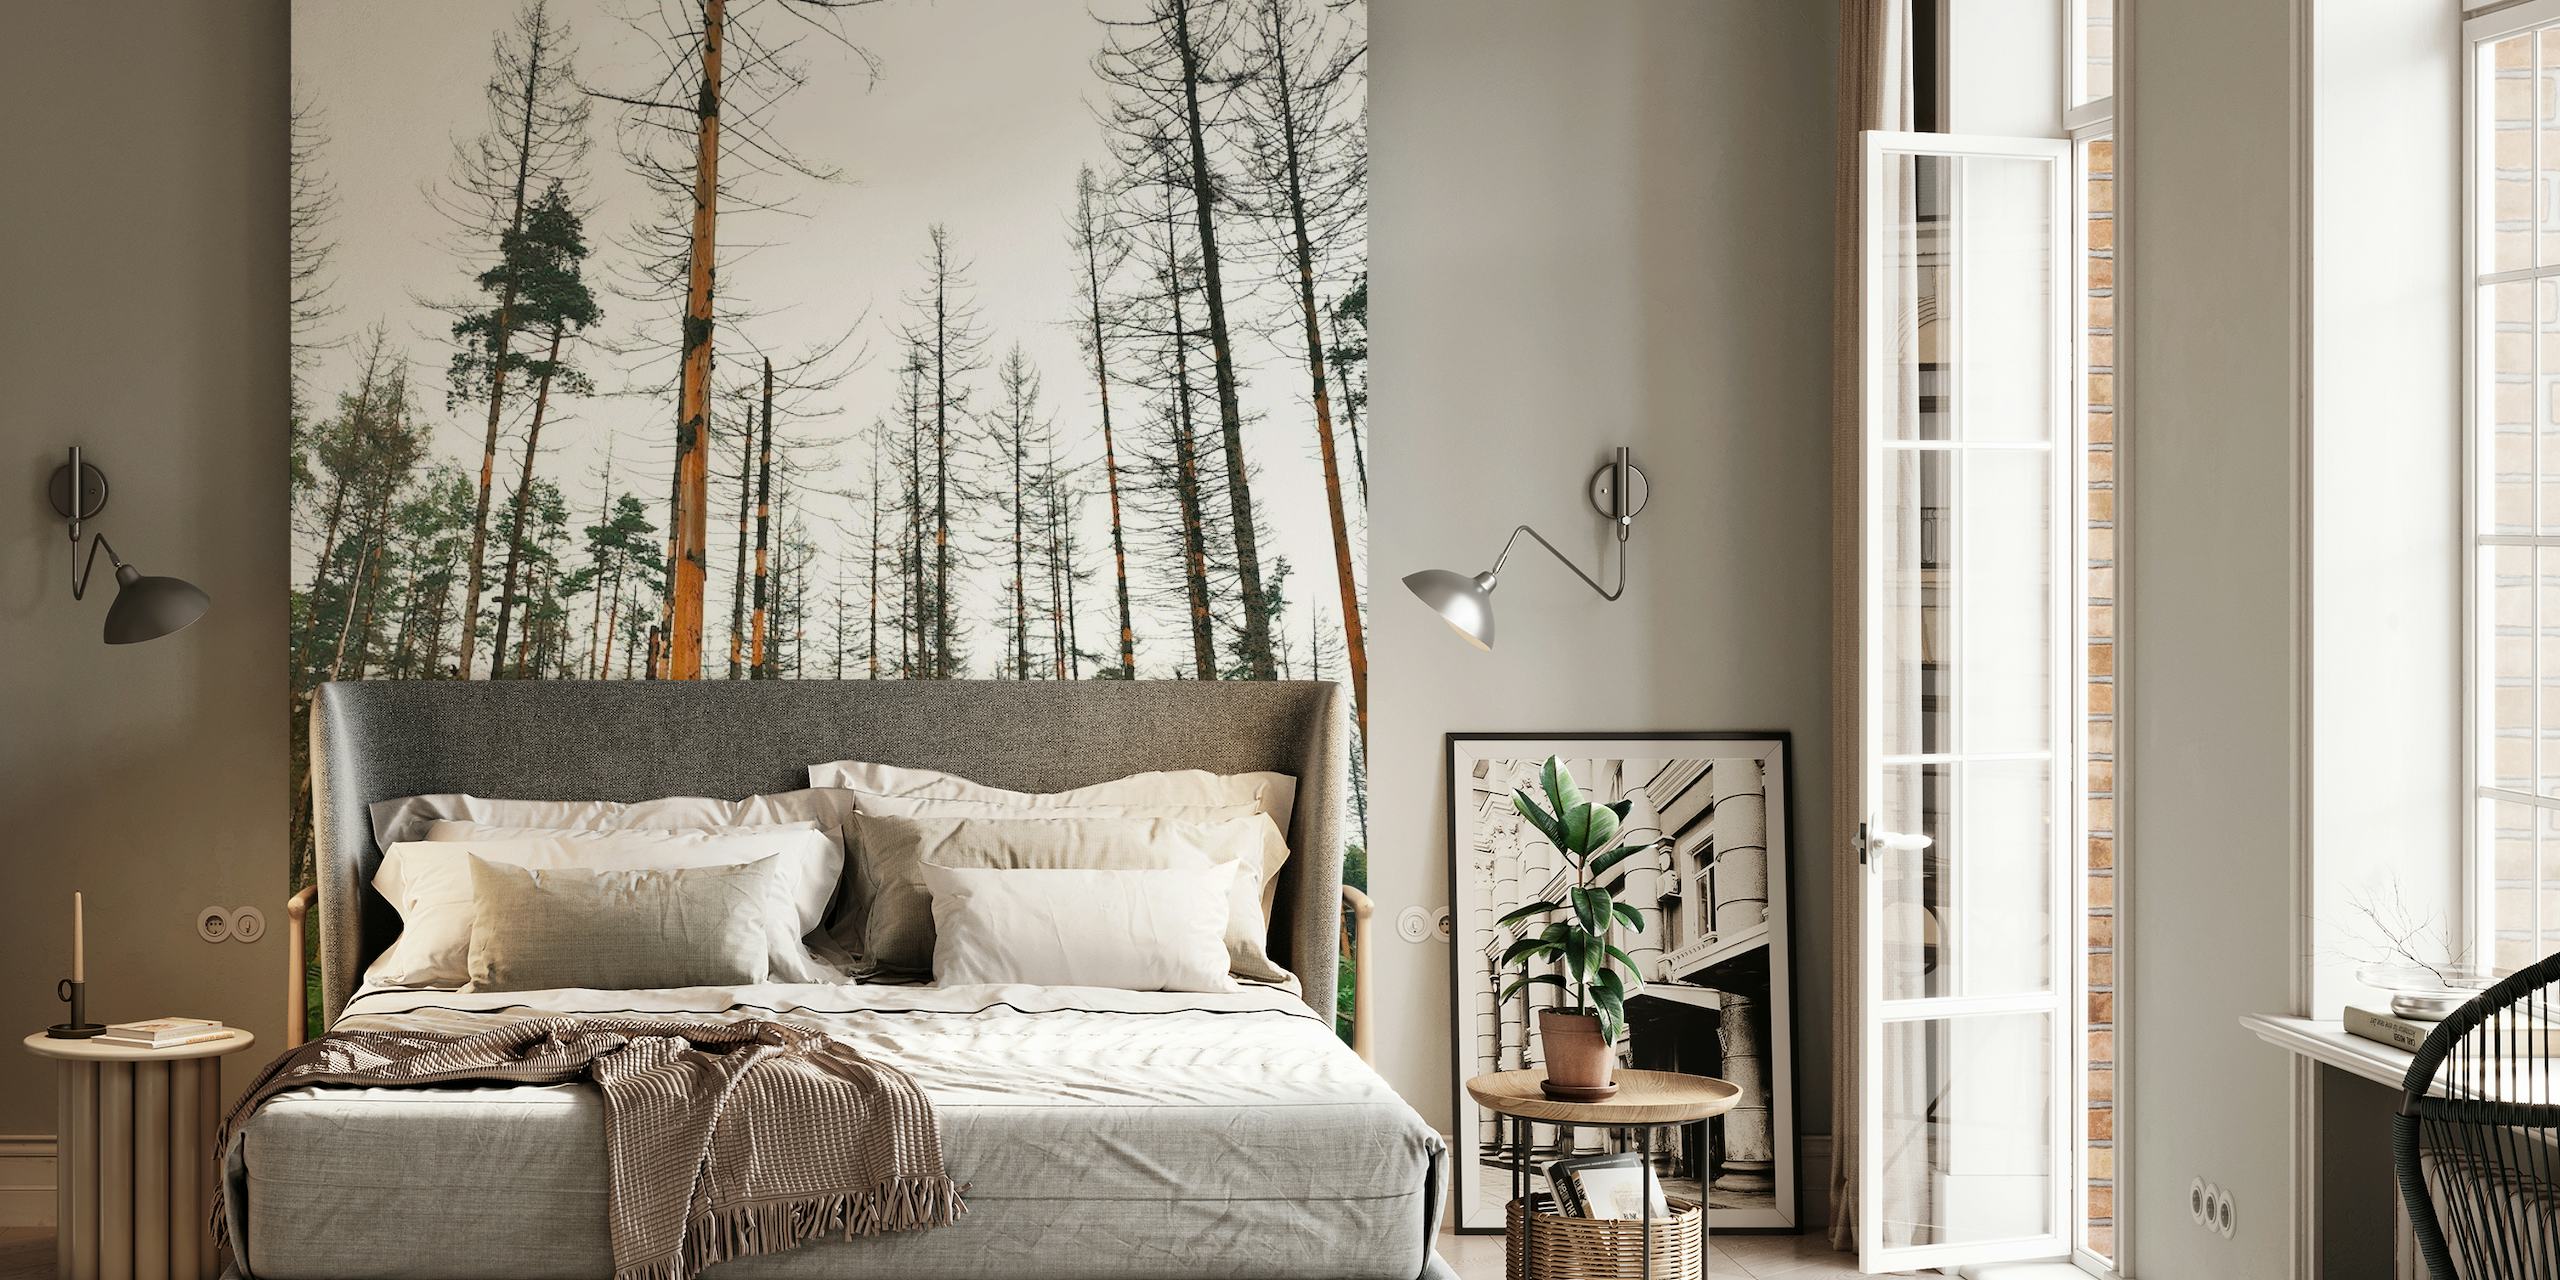 Wall mural of an autumn forest with tall trees and a green fern-covered floor.